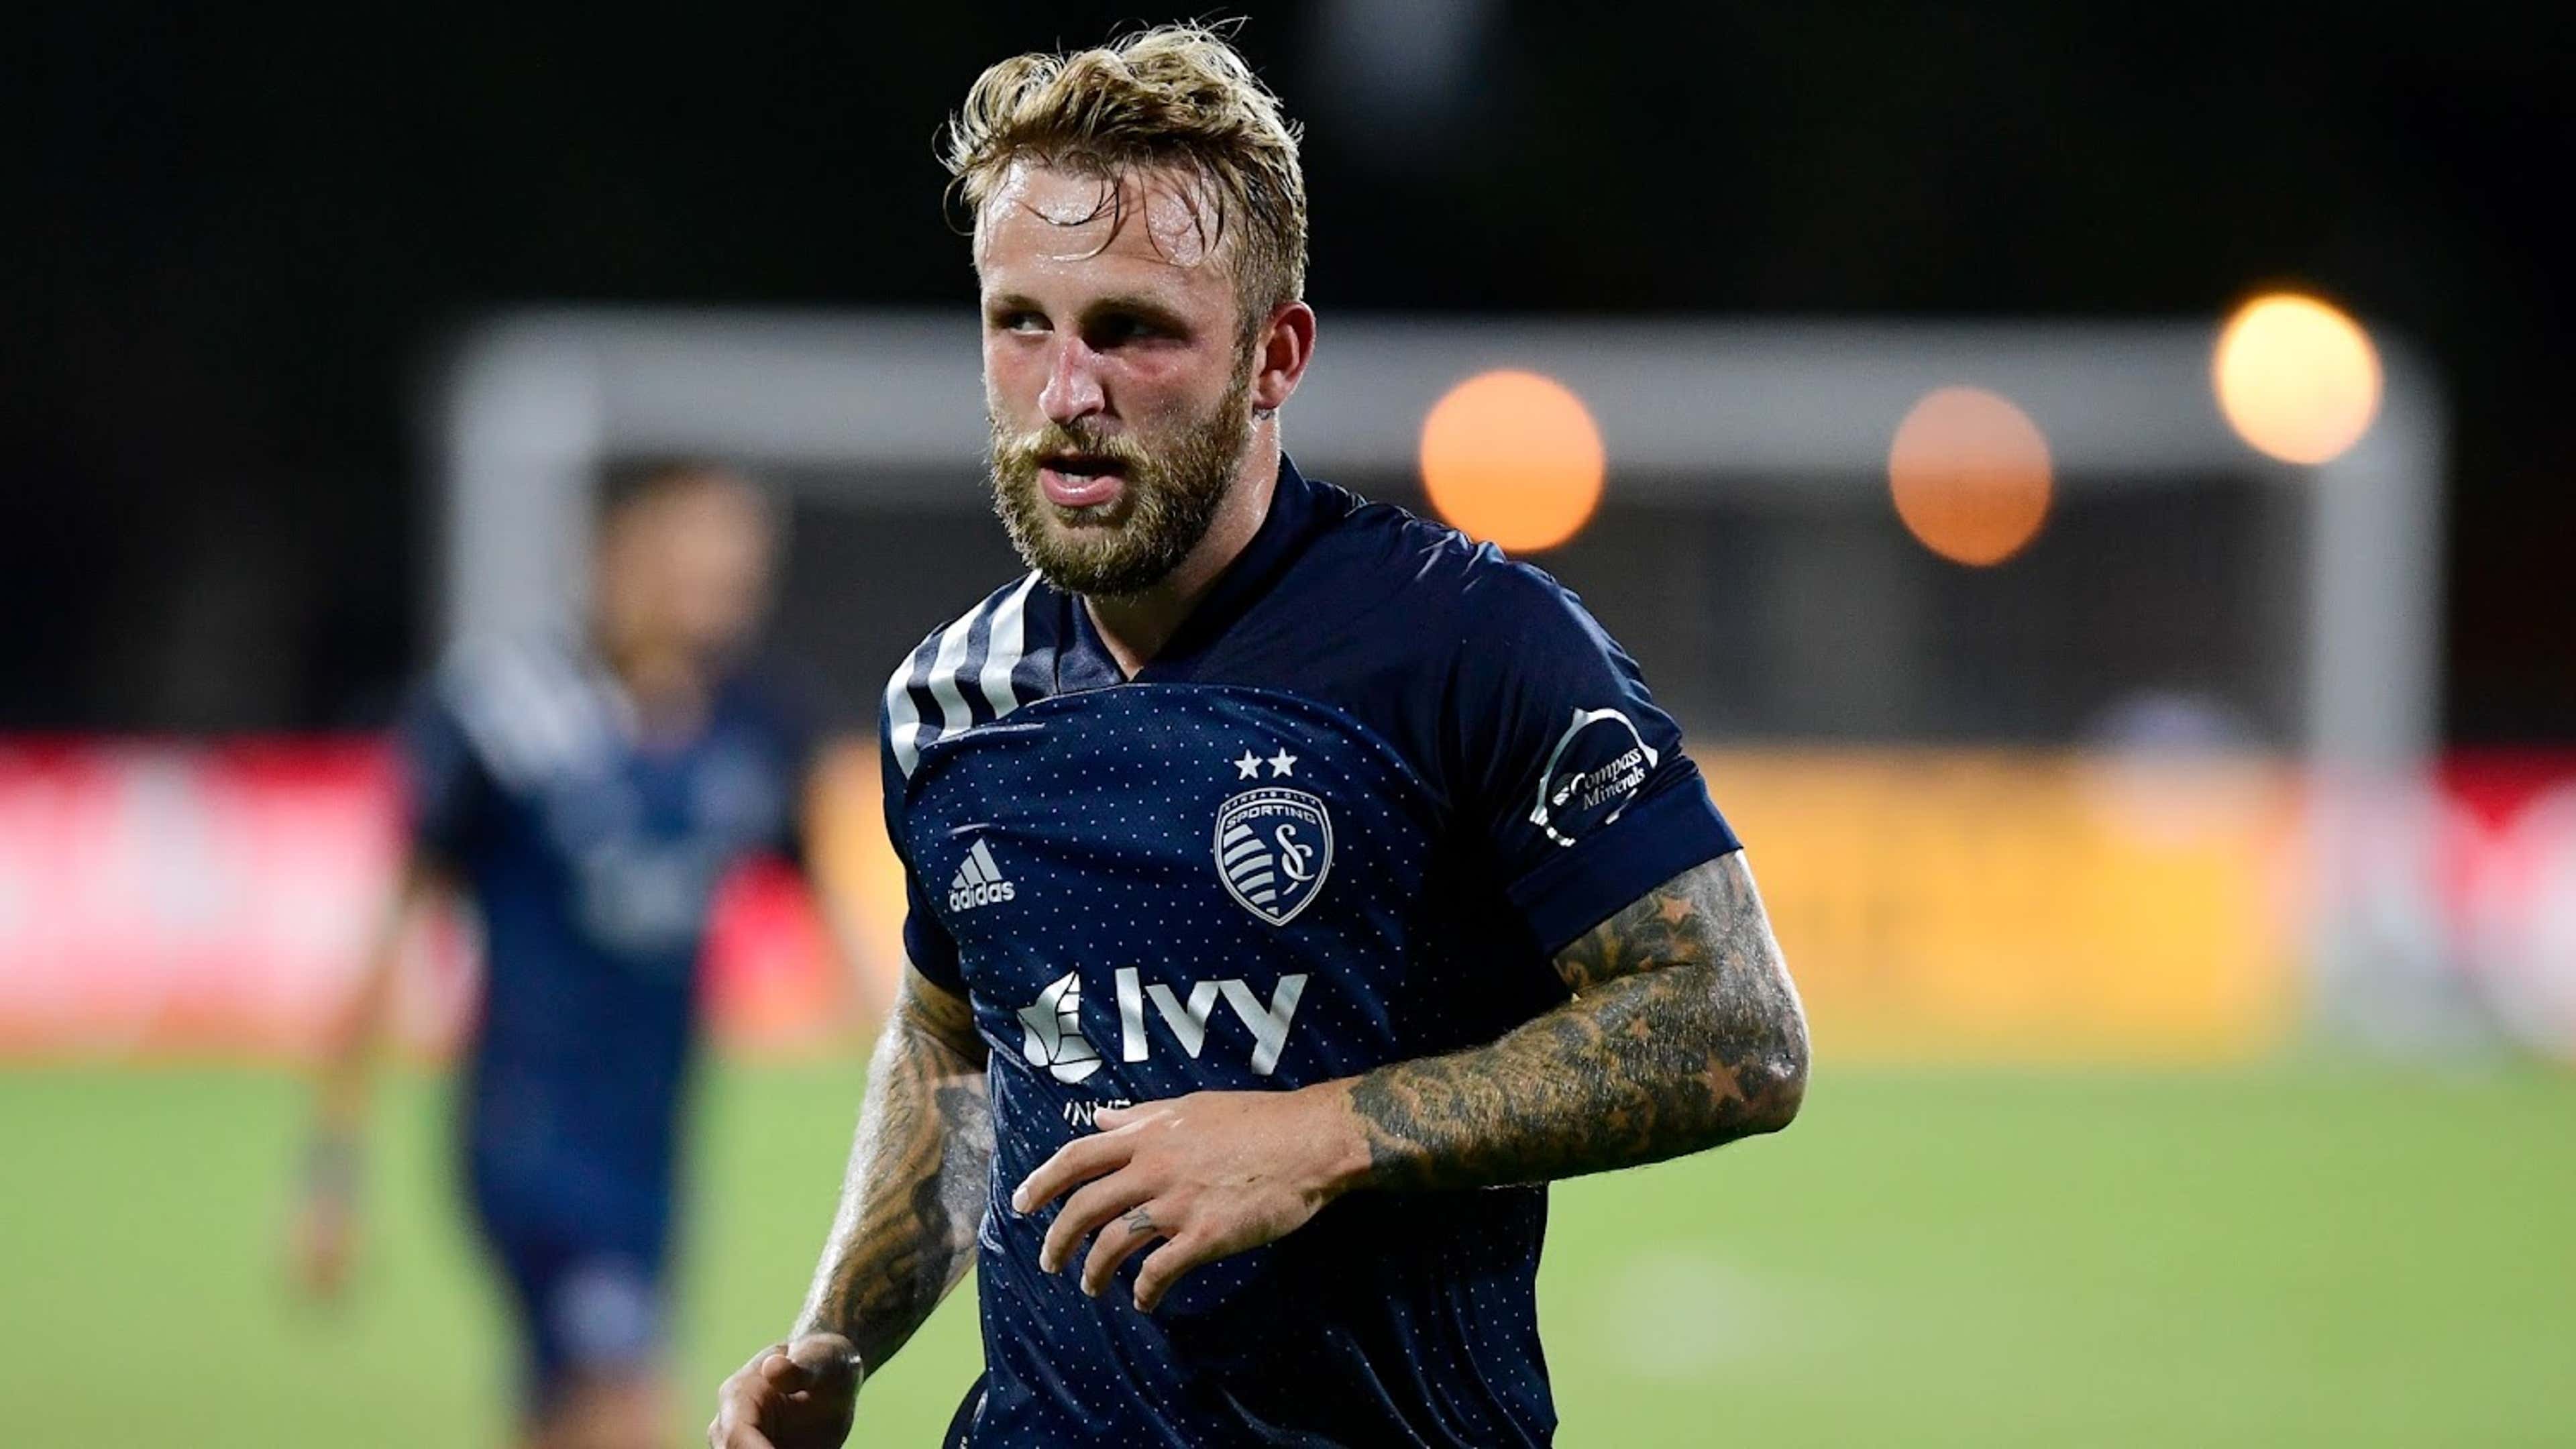 Johnny Russell Sporting KC